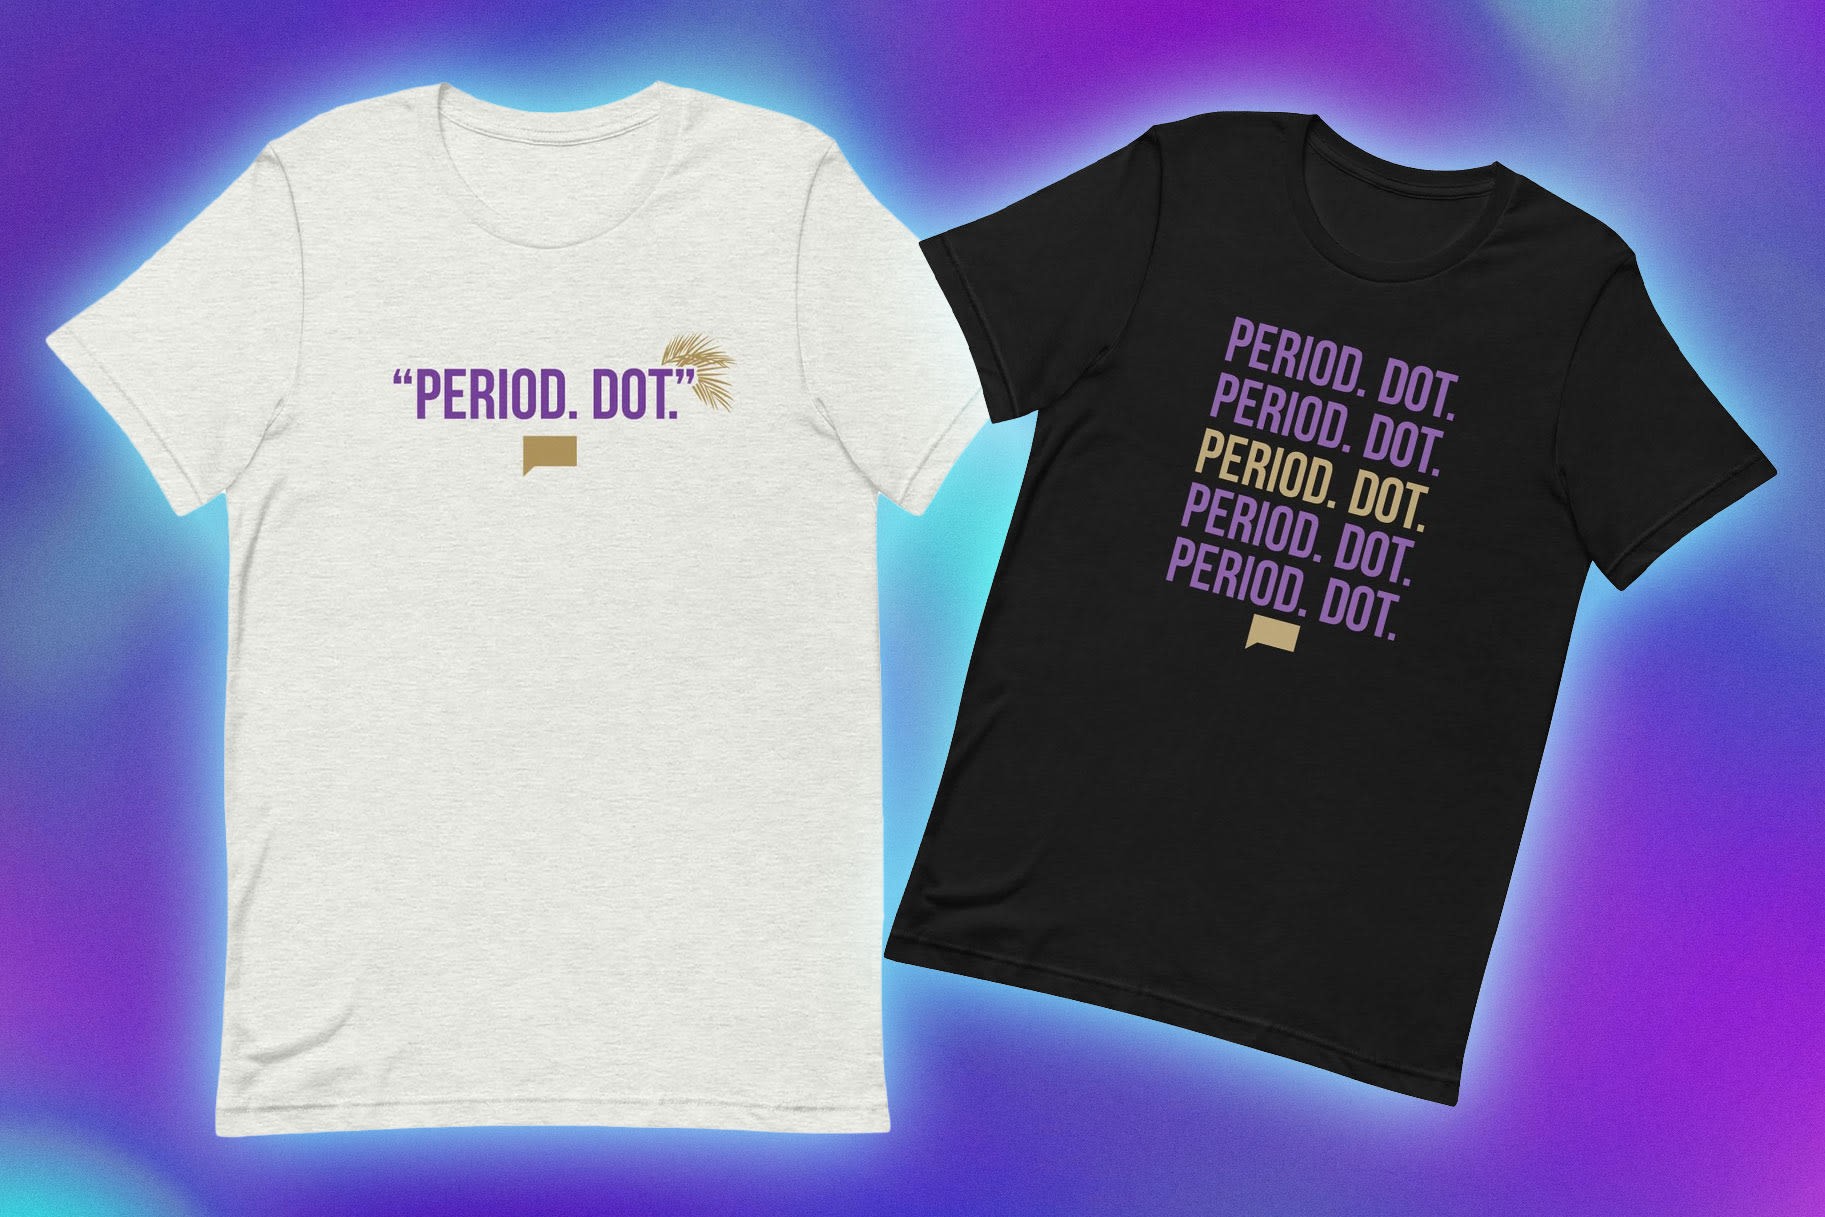 Chanel Ayan's Iconic "Period. Dot." Catchphrase Can Be Yours with $25 RHODubai Merch | Bravo TV Official Site